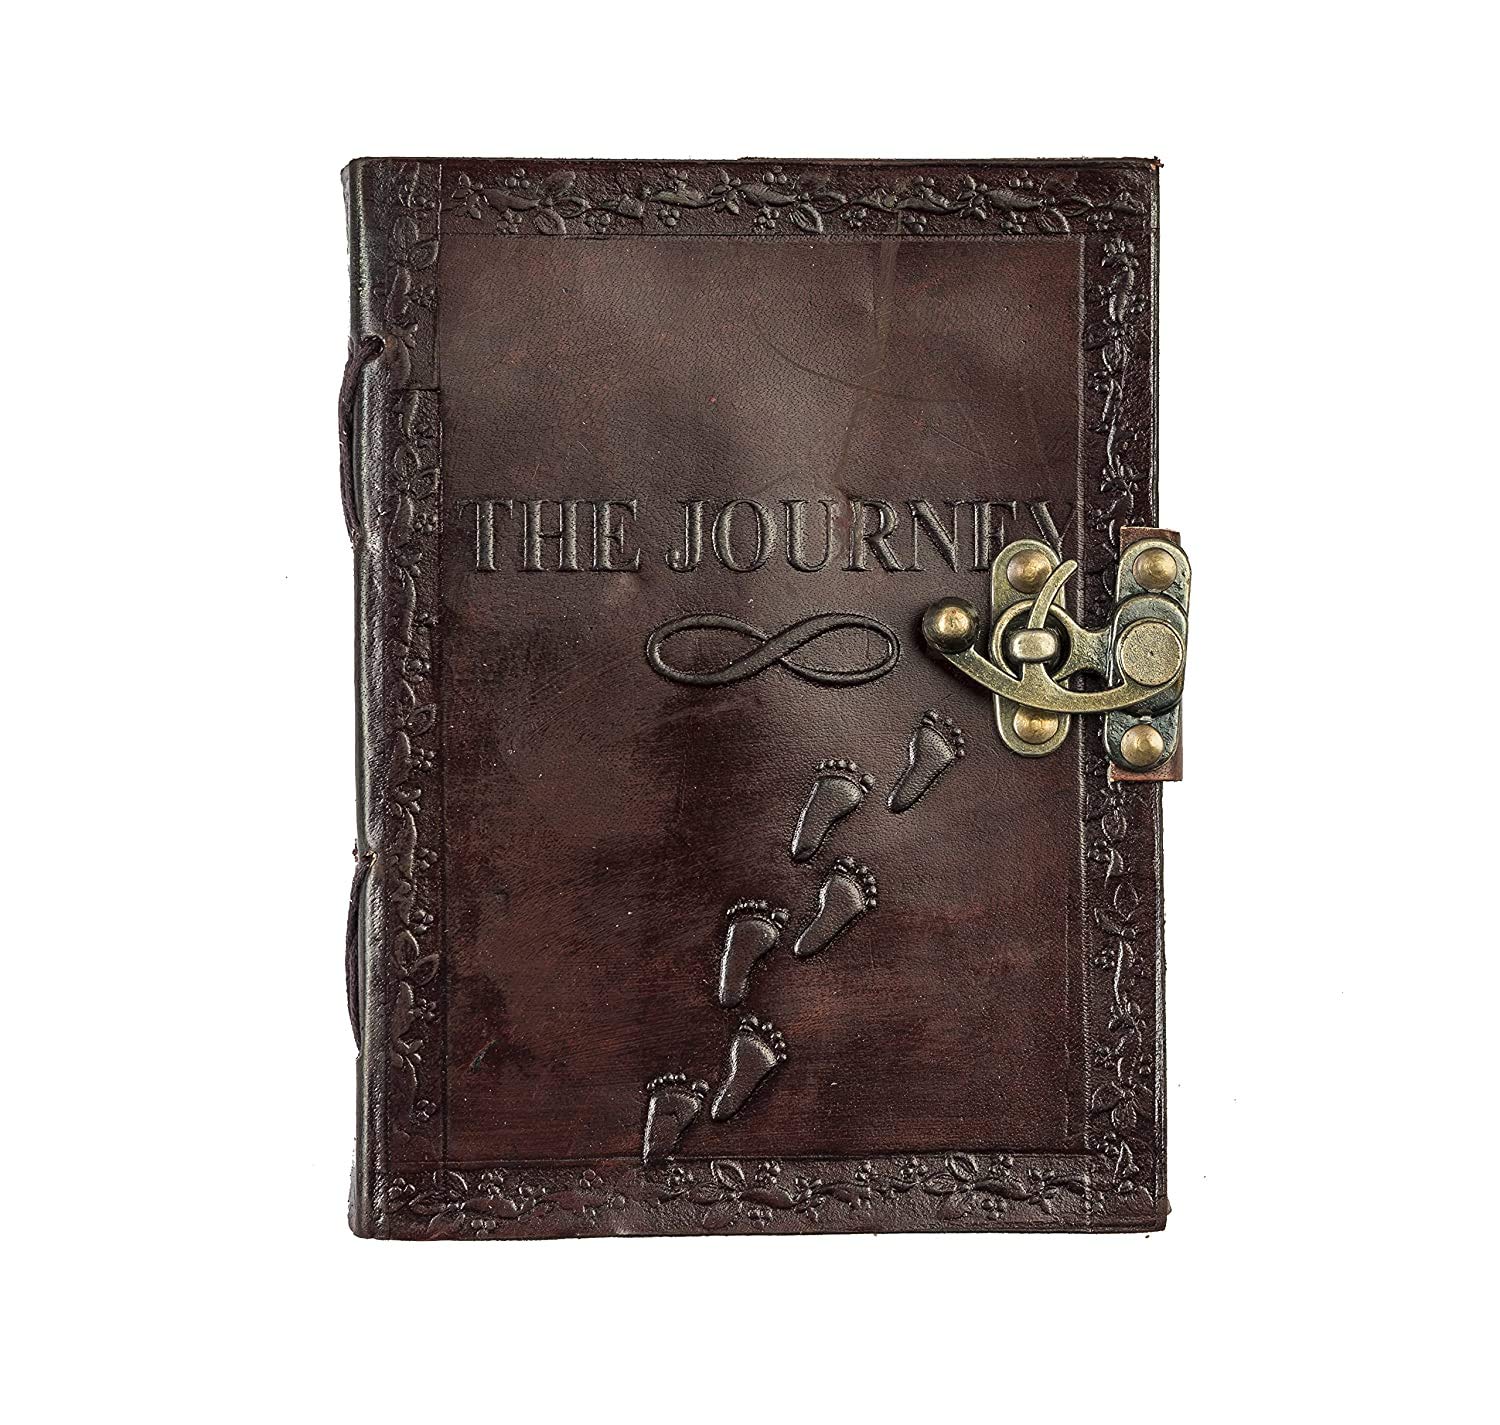 Vintage Leather Journal Diary With Engraved Journey Brown Best Gift for Men Women